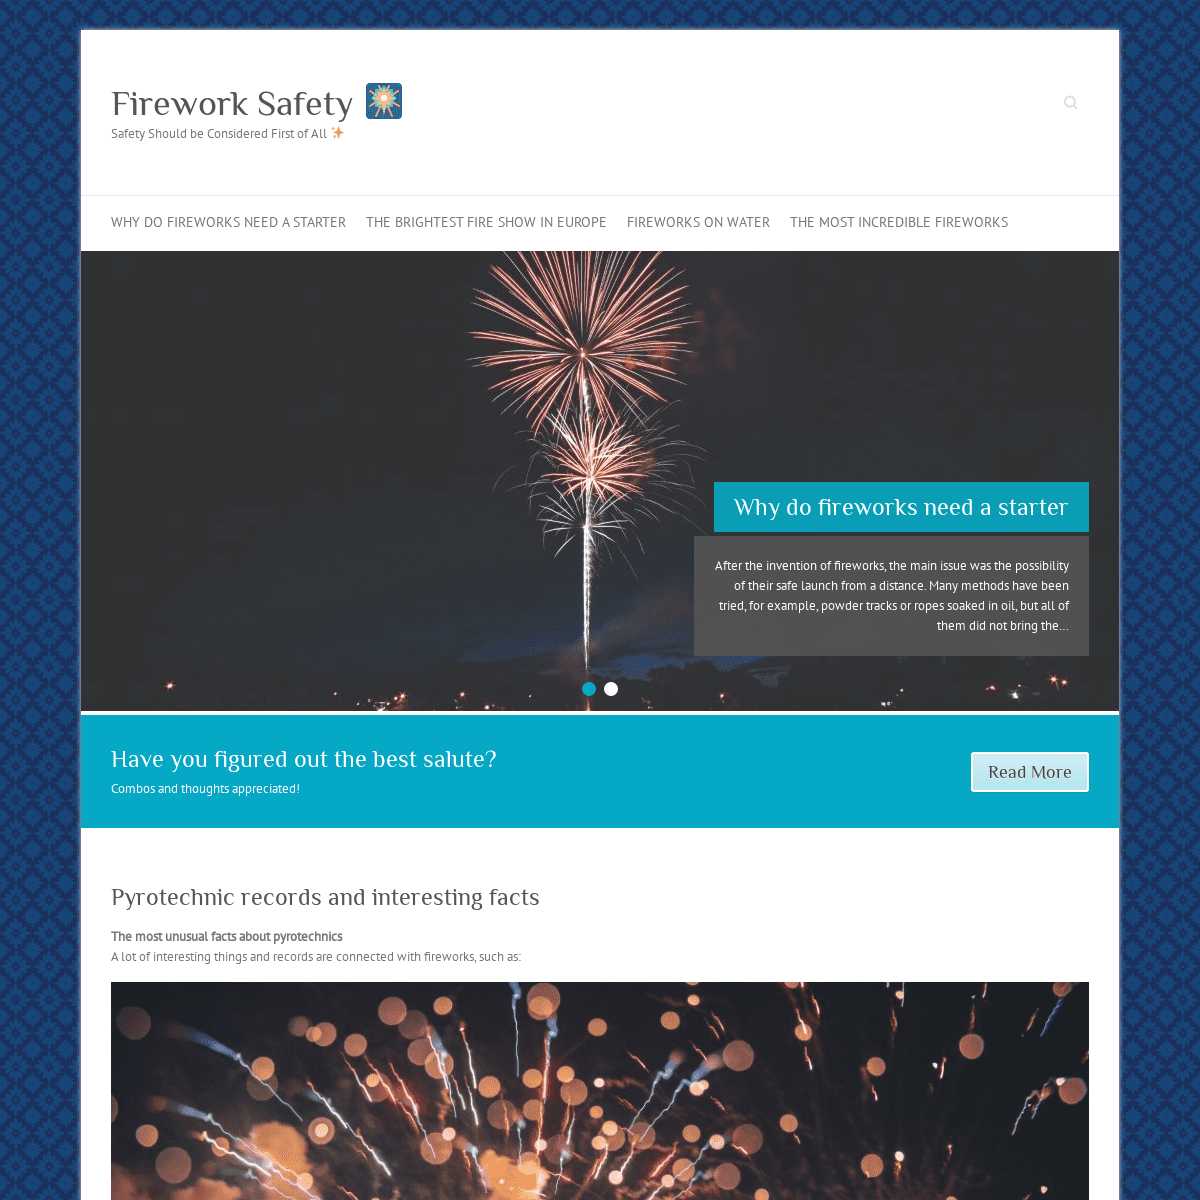 A complete backup of https://fireworksafety.com